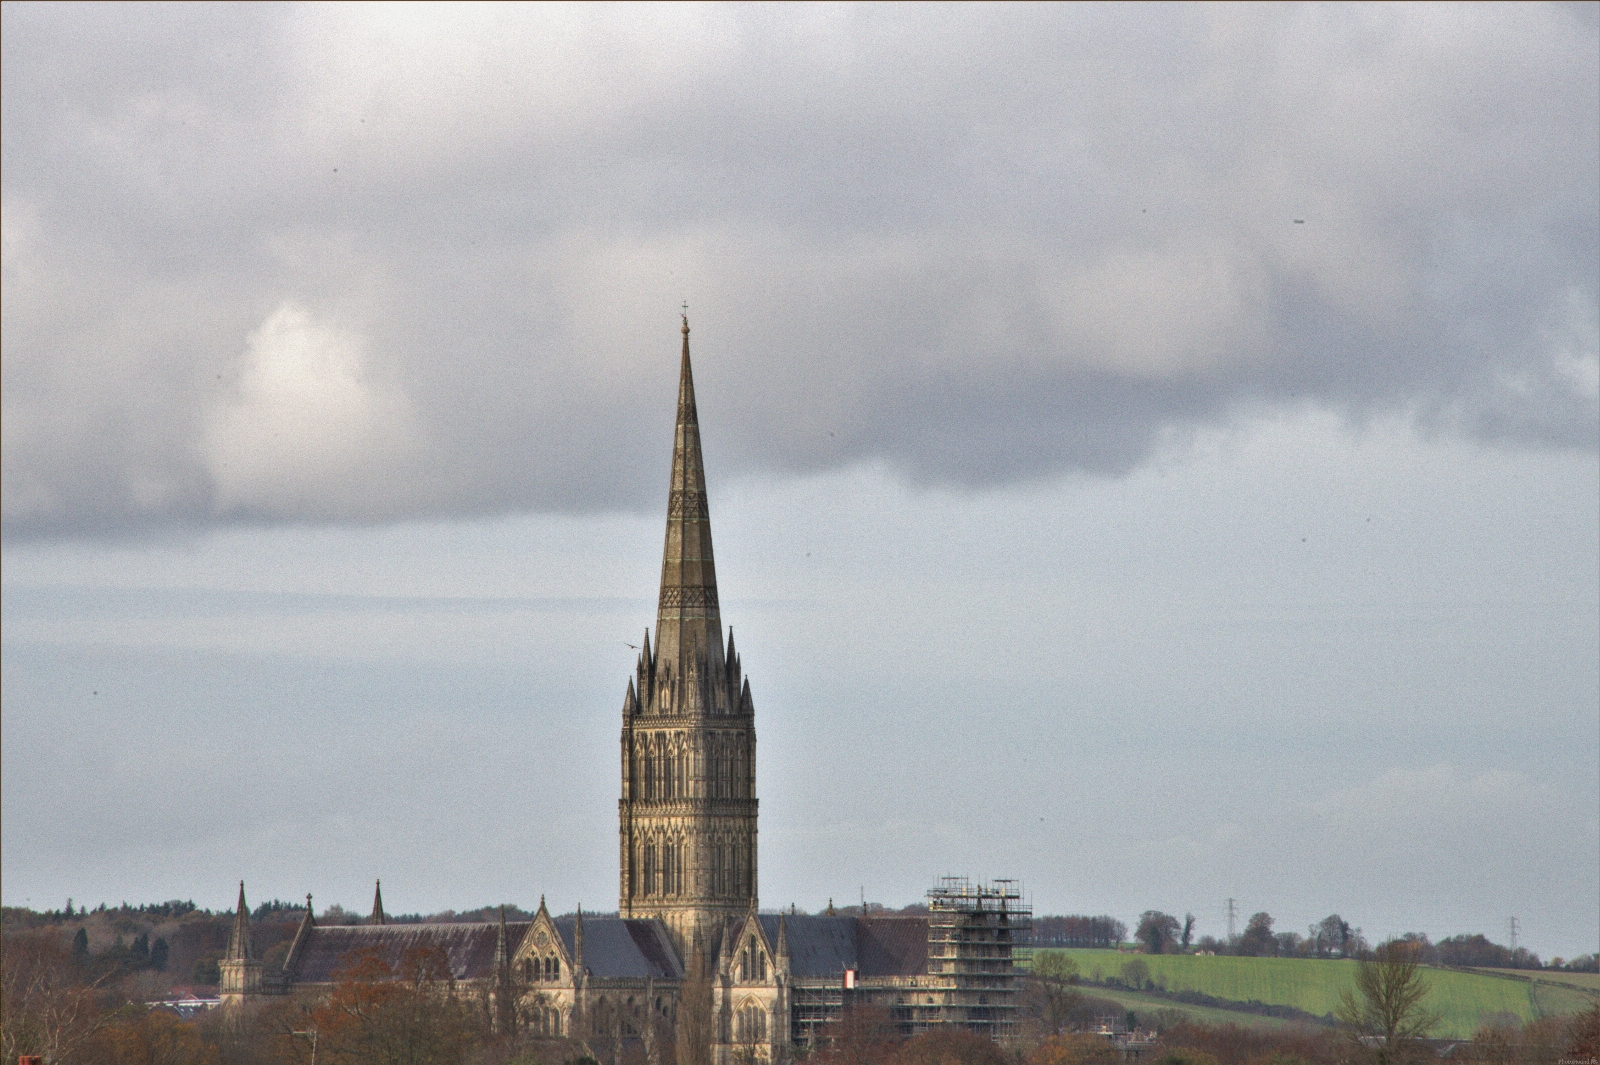 Image of Salisbury Cathedral - Exterior by michael bennett